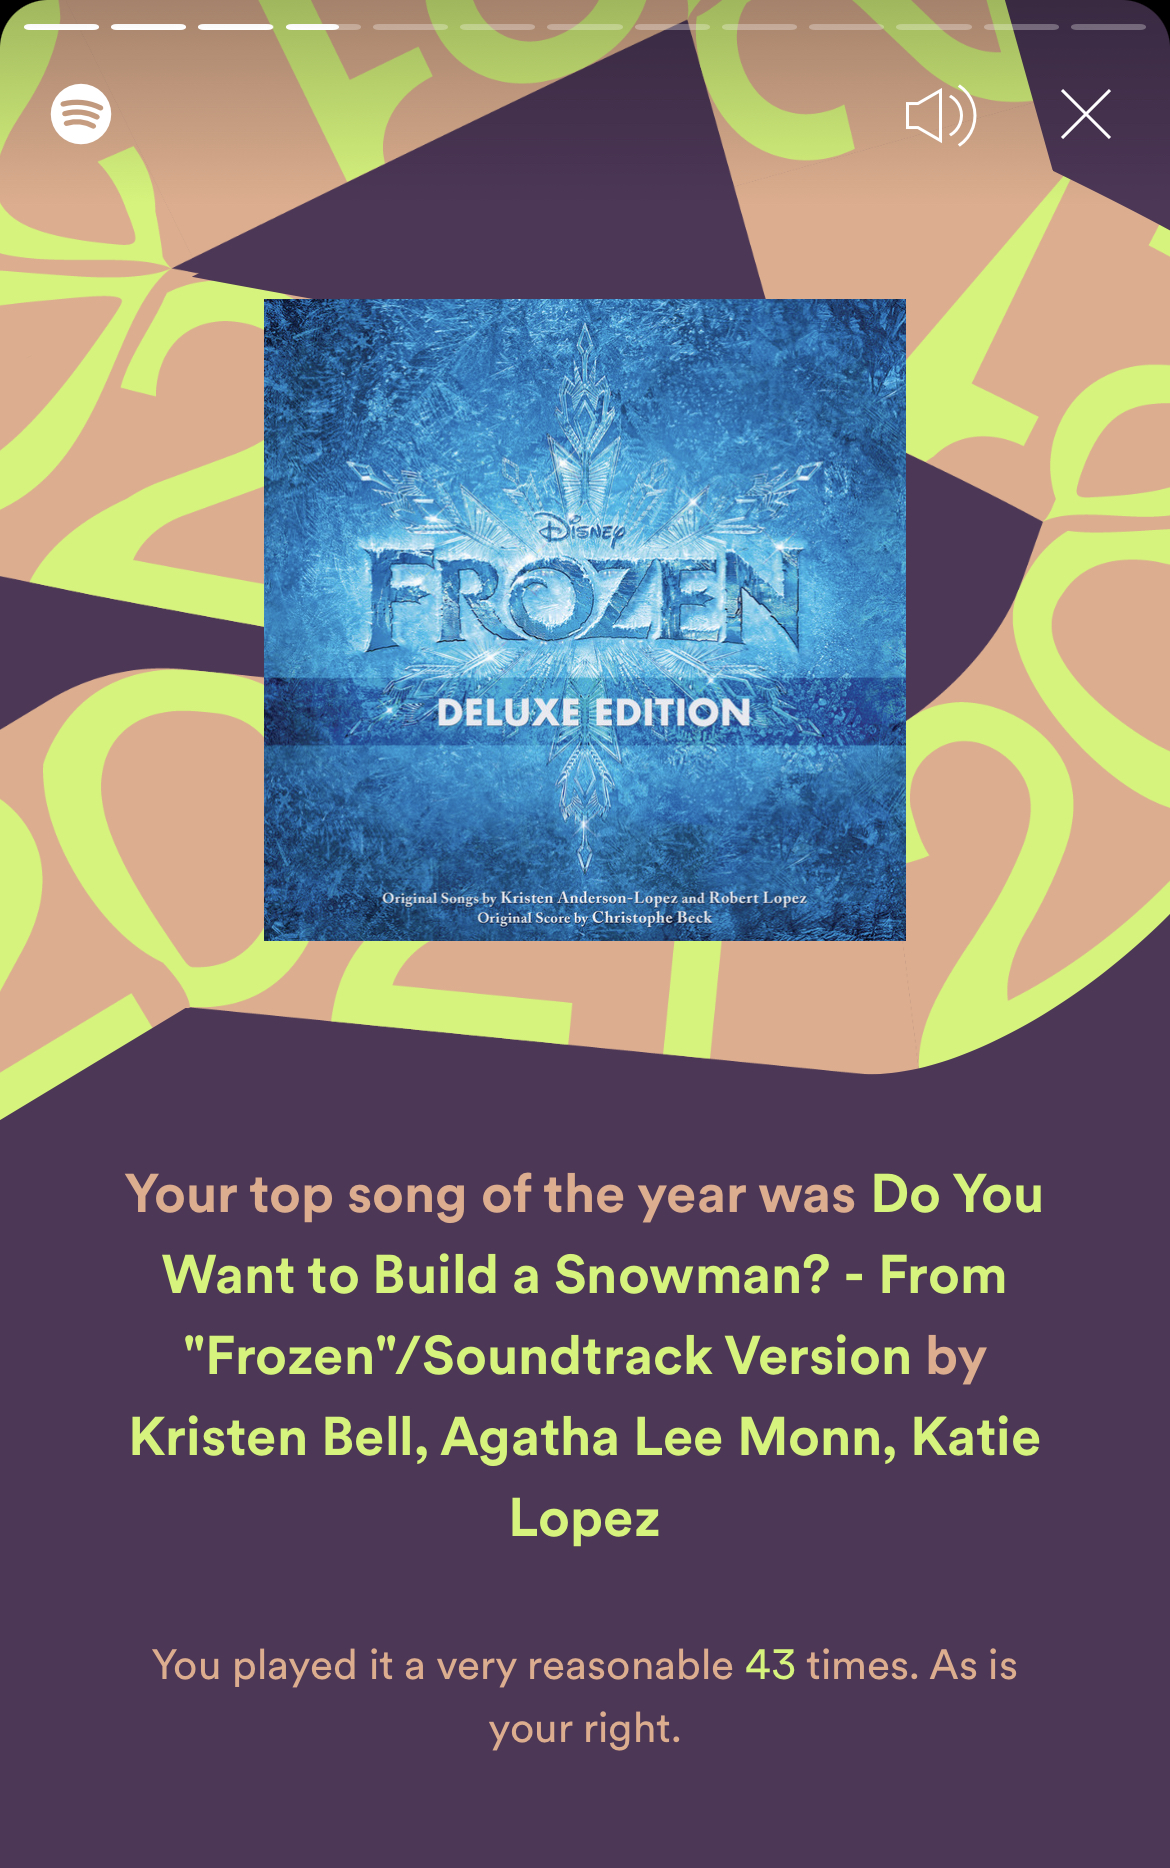 Do You Want to Build a Snowman? - From Frozen/Soundtrack Version